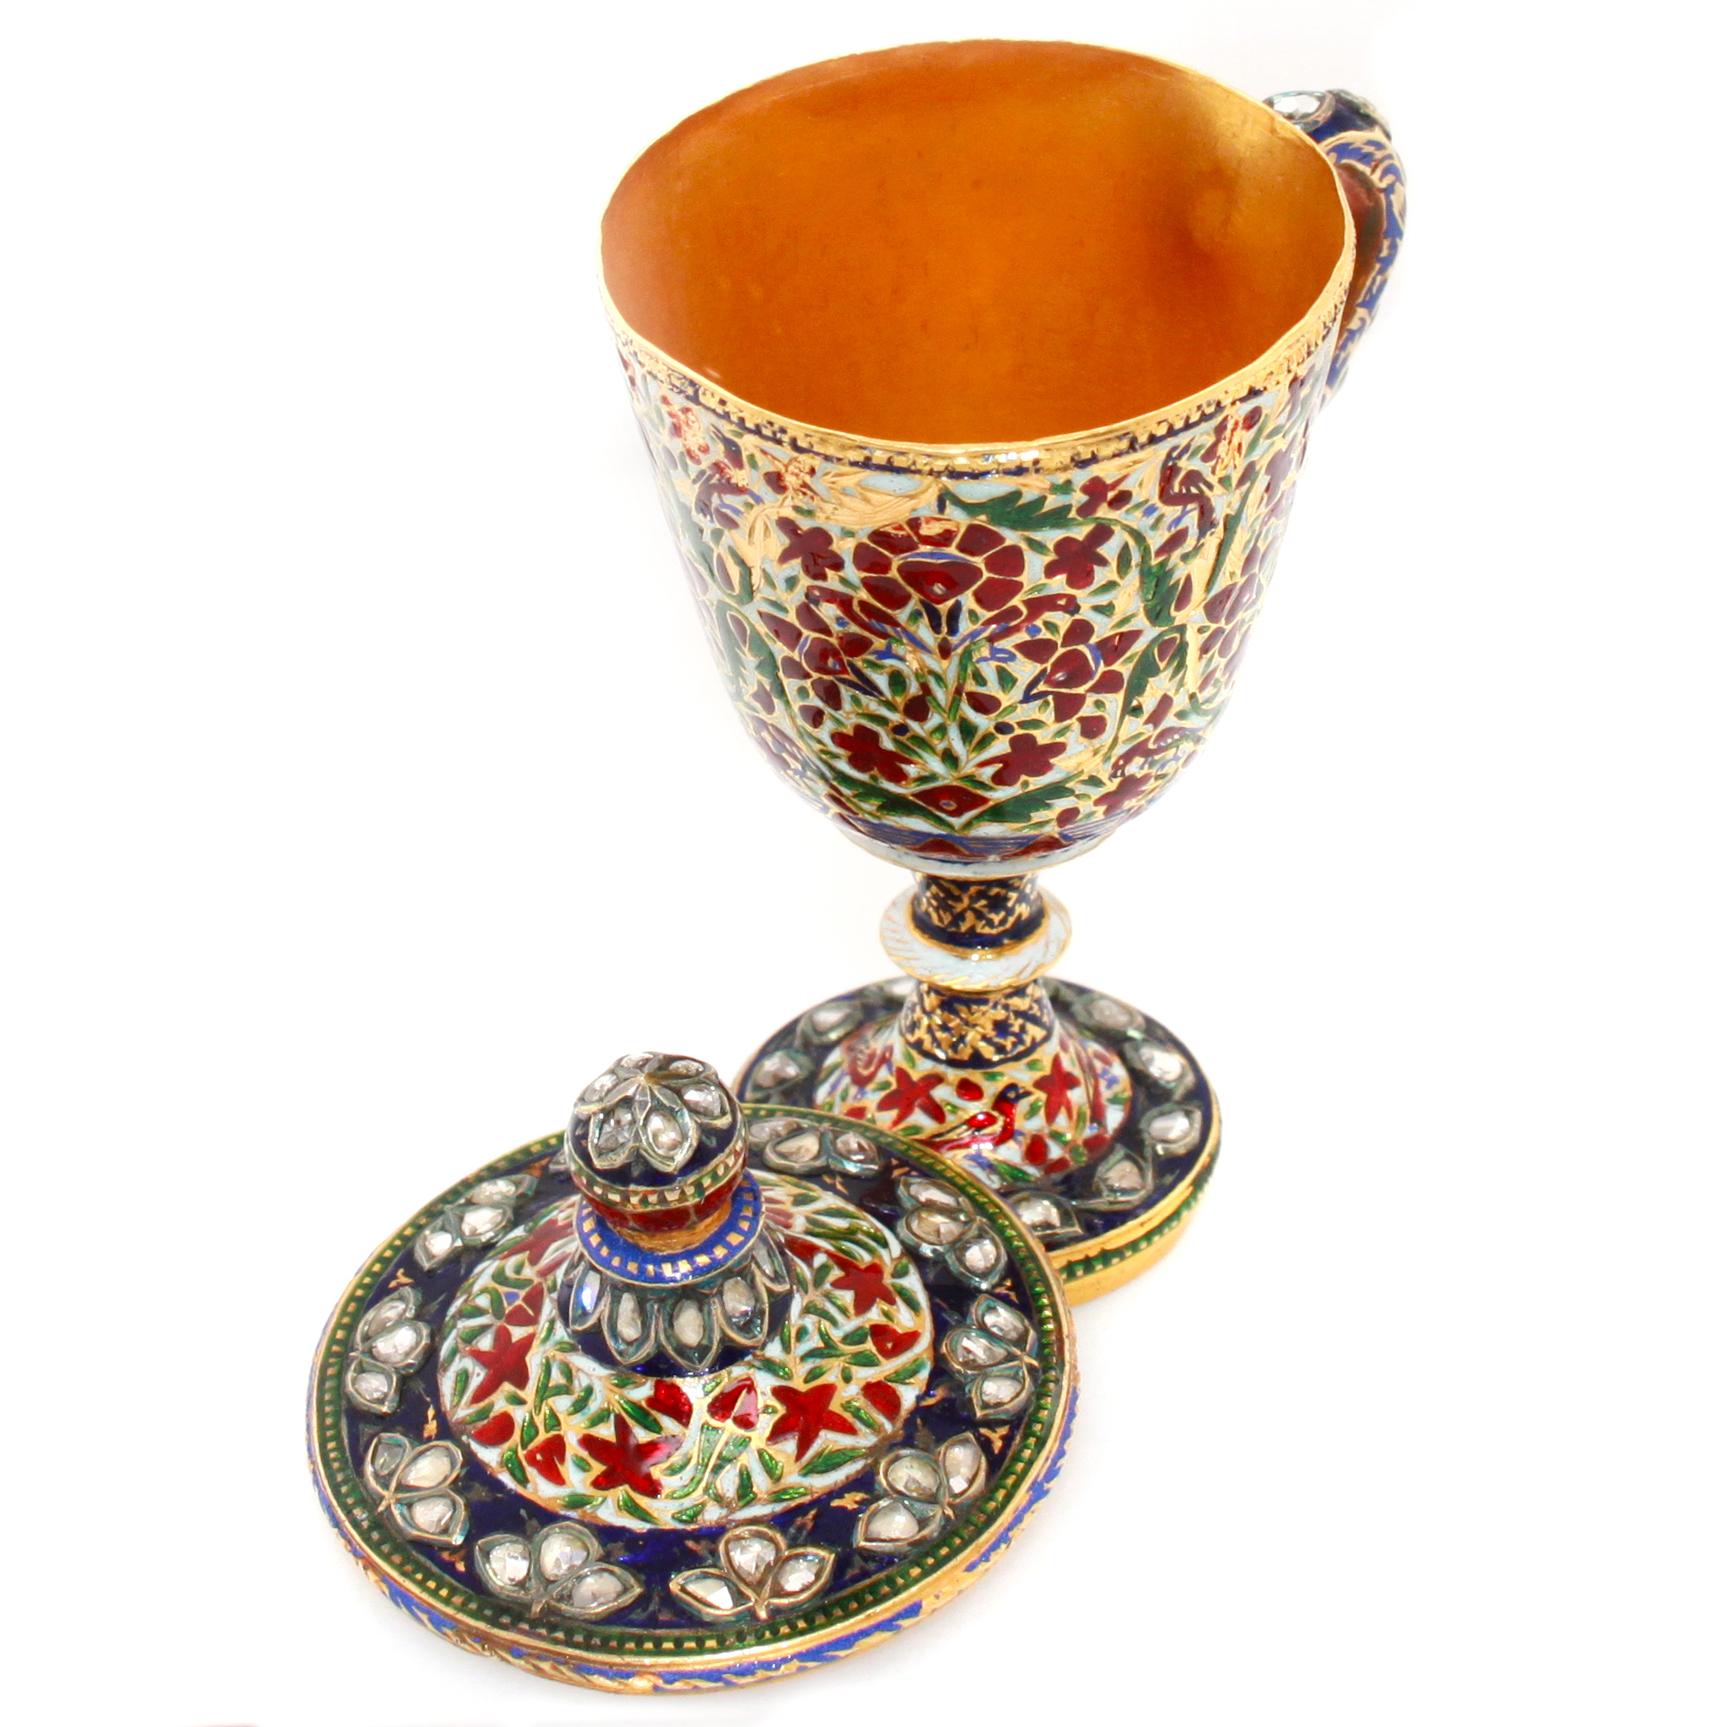 Rare Mughal Enamel and Diamond Cup, Early 19th Century For Sale 1